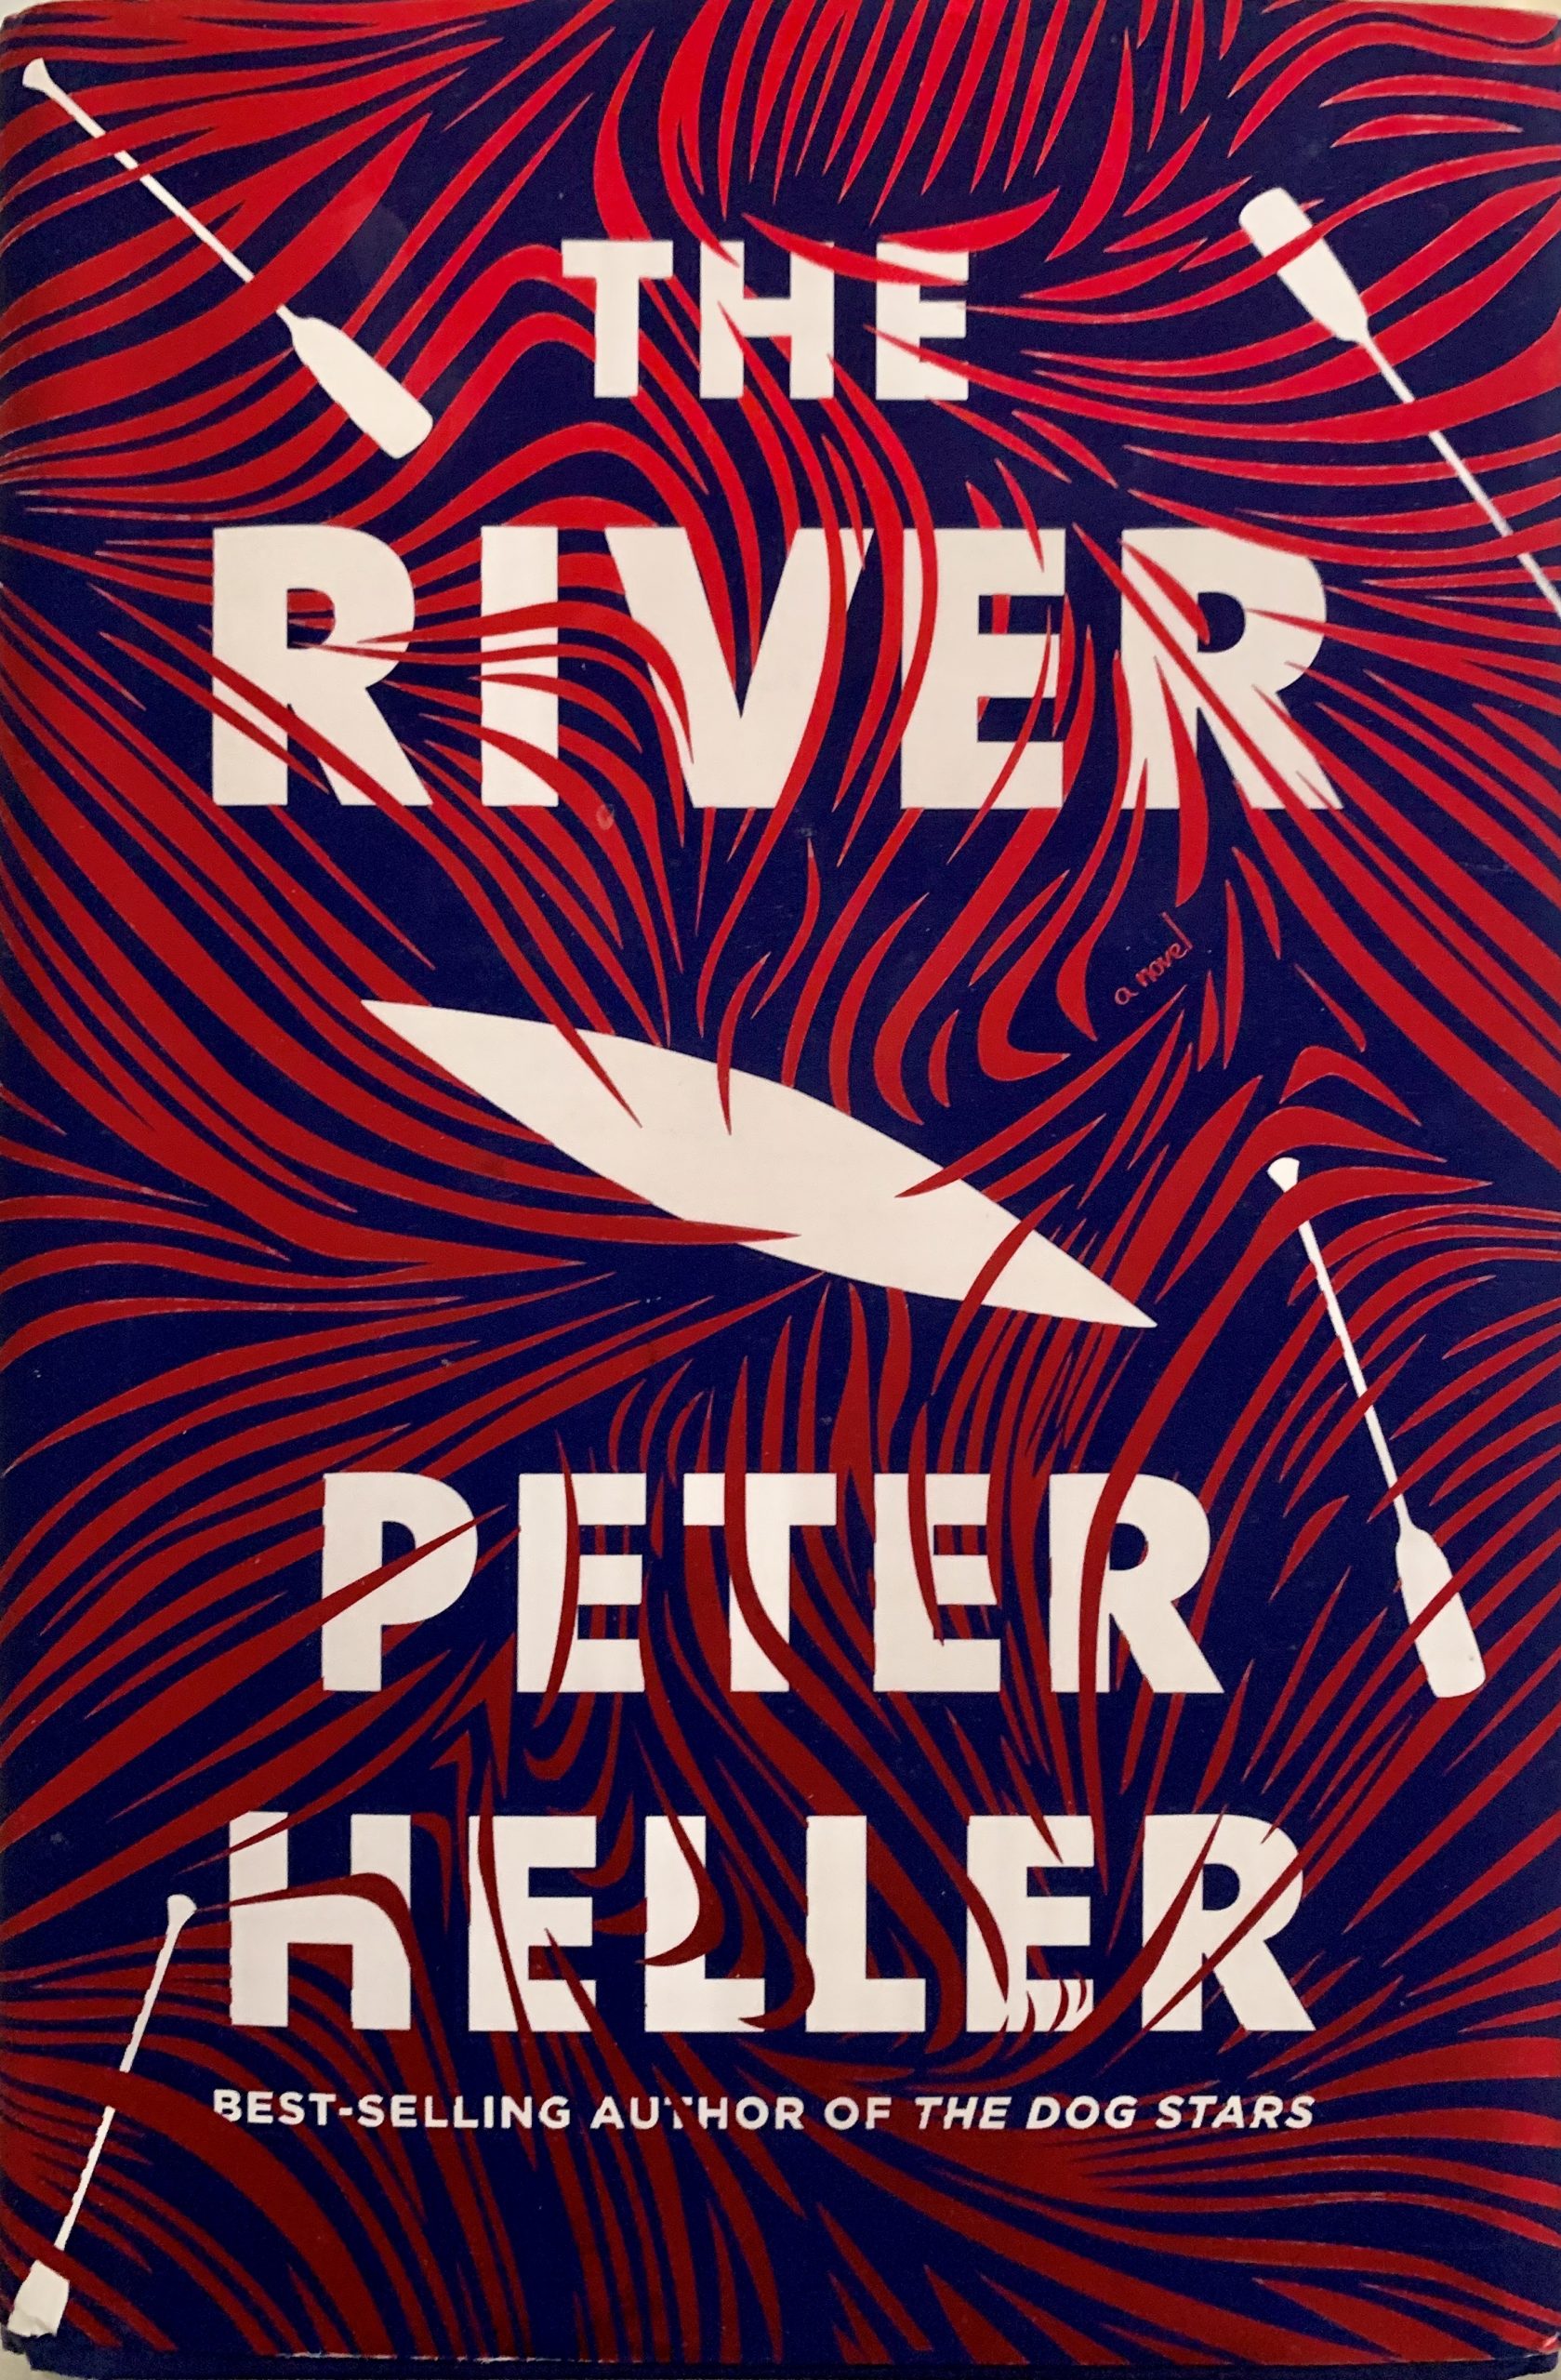 the river peter heller summary